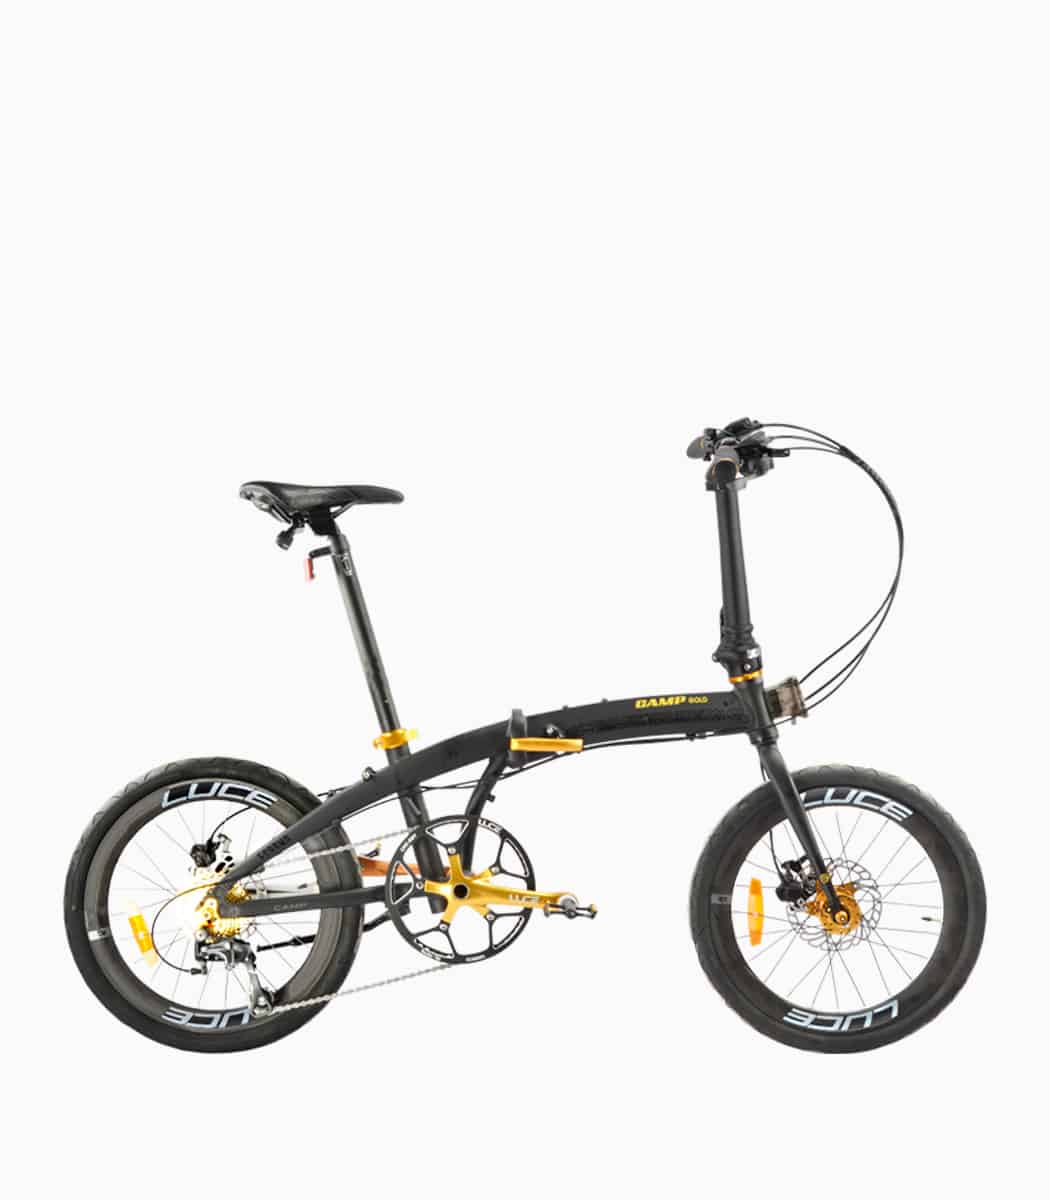 CAMP GOLD (BLACK) foldable bicycle right V3